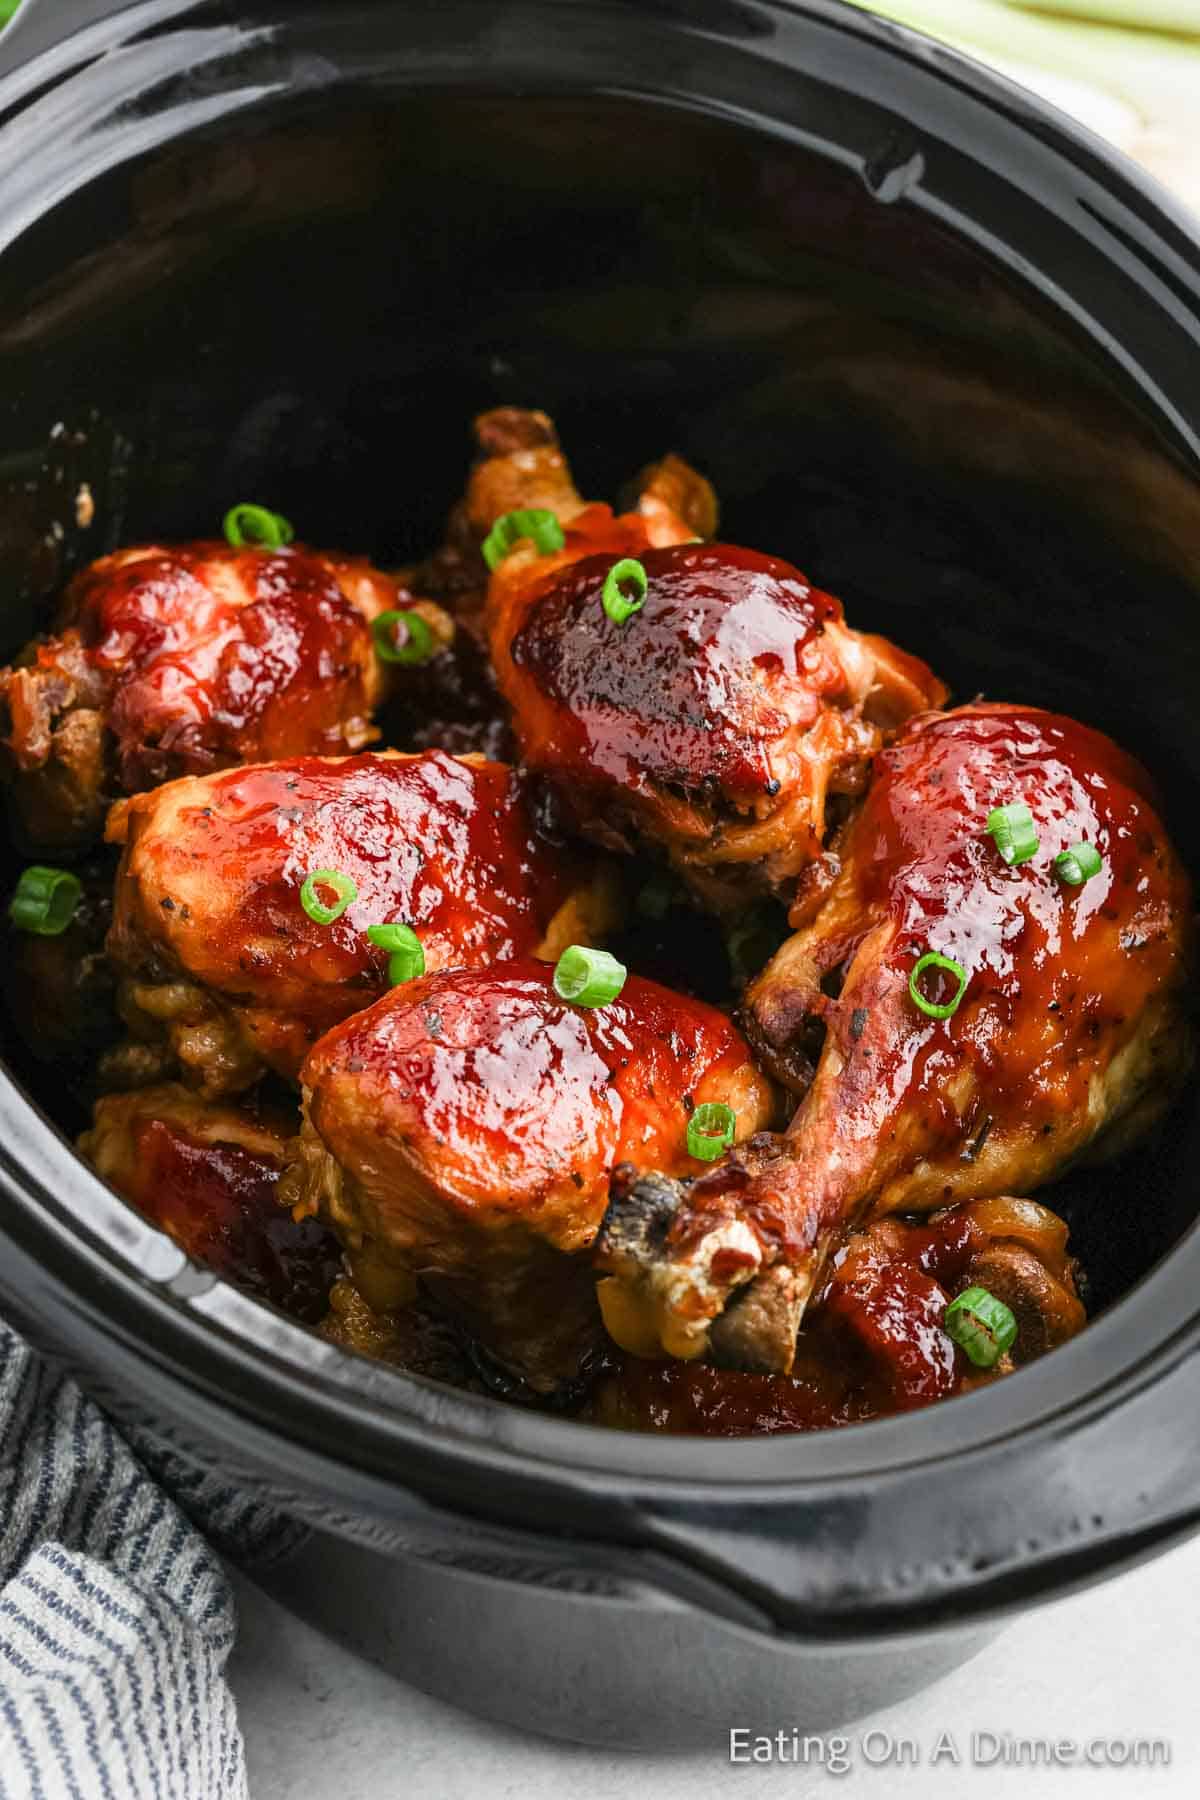 A crock pot filled with several cooked chicken drumsticks glazed with a rich, thick, red barbecue sauce, garnished with chopped green onions. The black interior of the crock pot contrasts with the vibrant colors of the dish. This BBQ ranch drumsticks recipe is perfect for a hearty family meal.